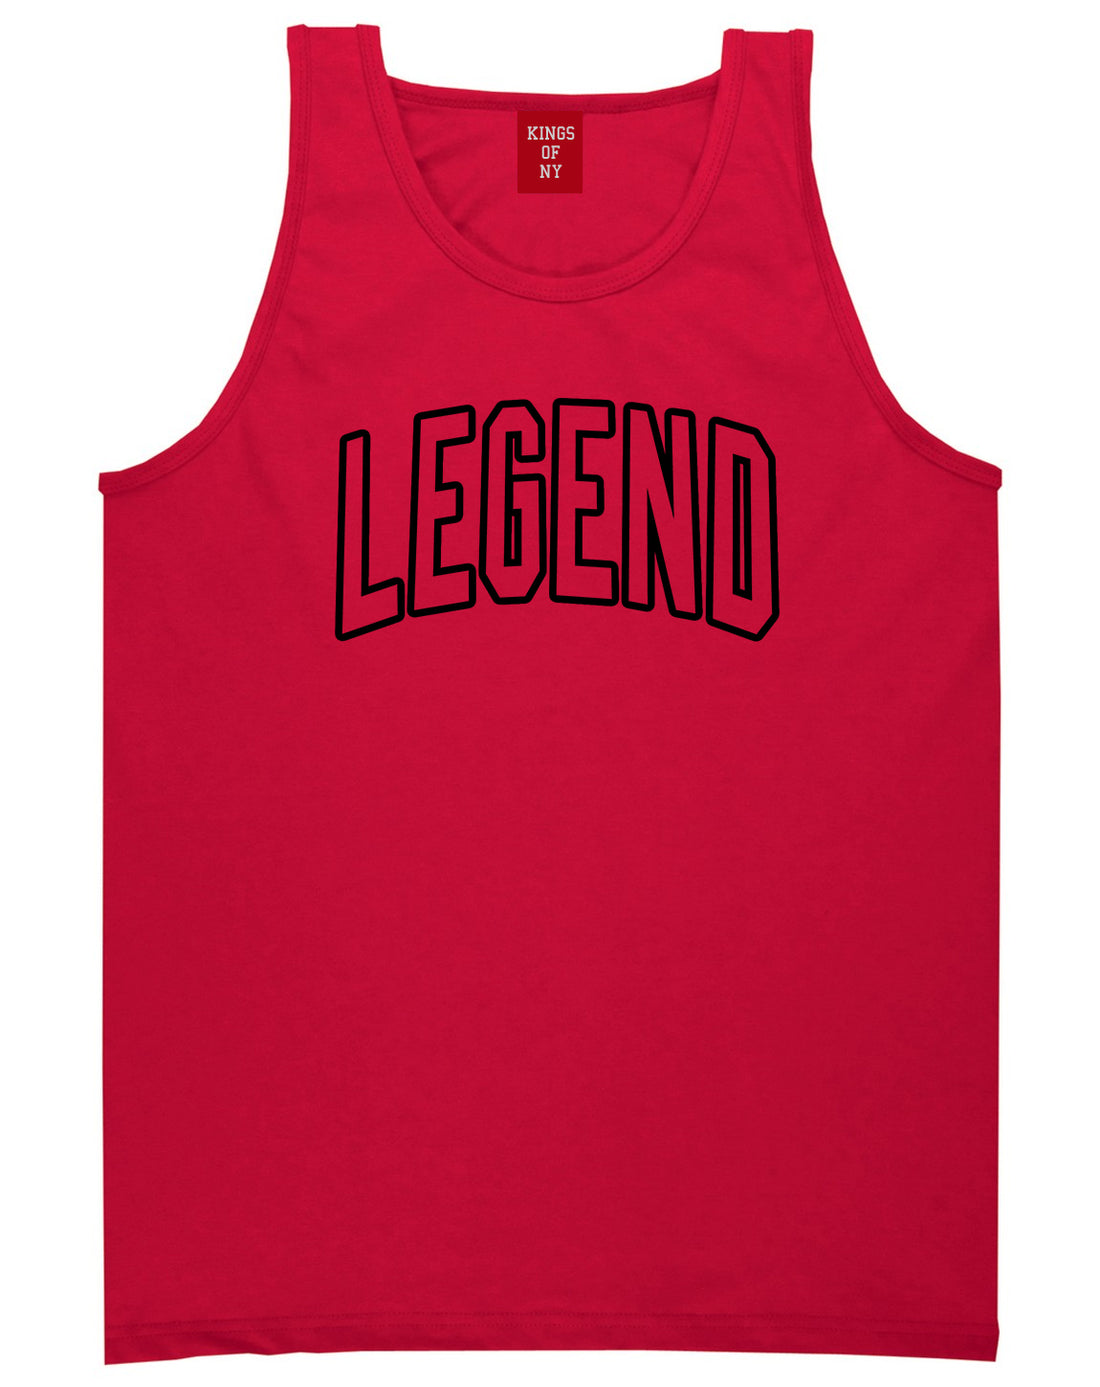 Legend Outline Mens Tank Top Shirt Red by Kings Of NY